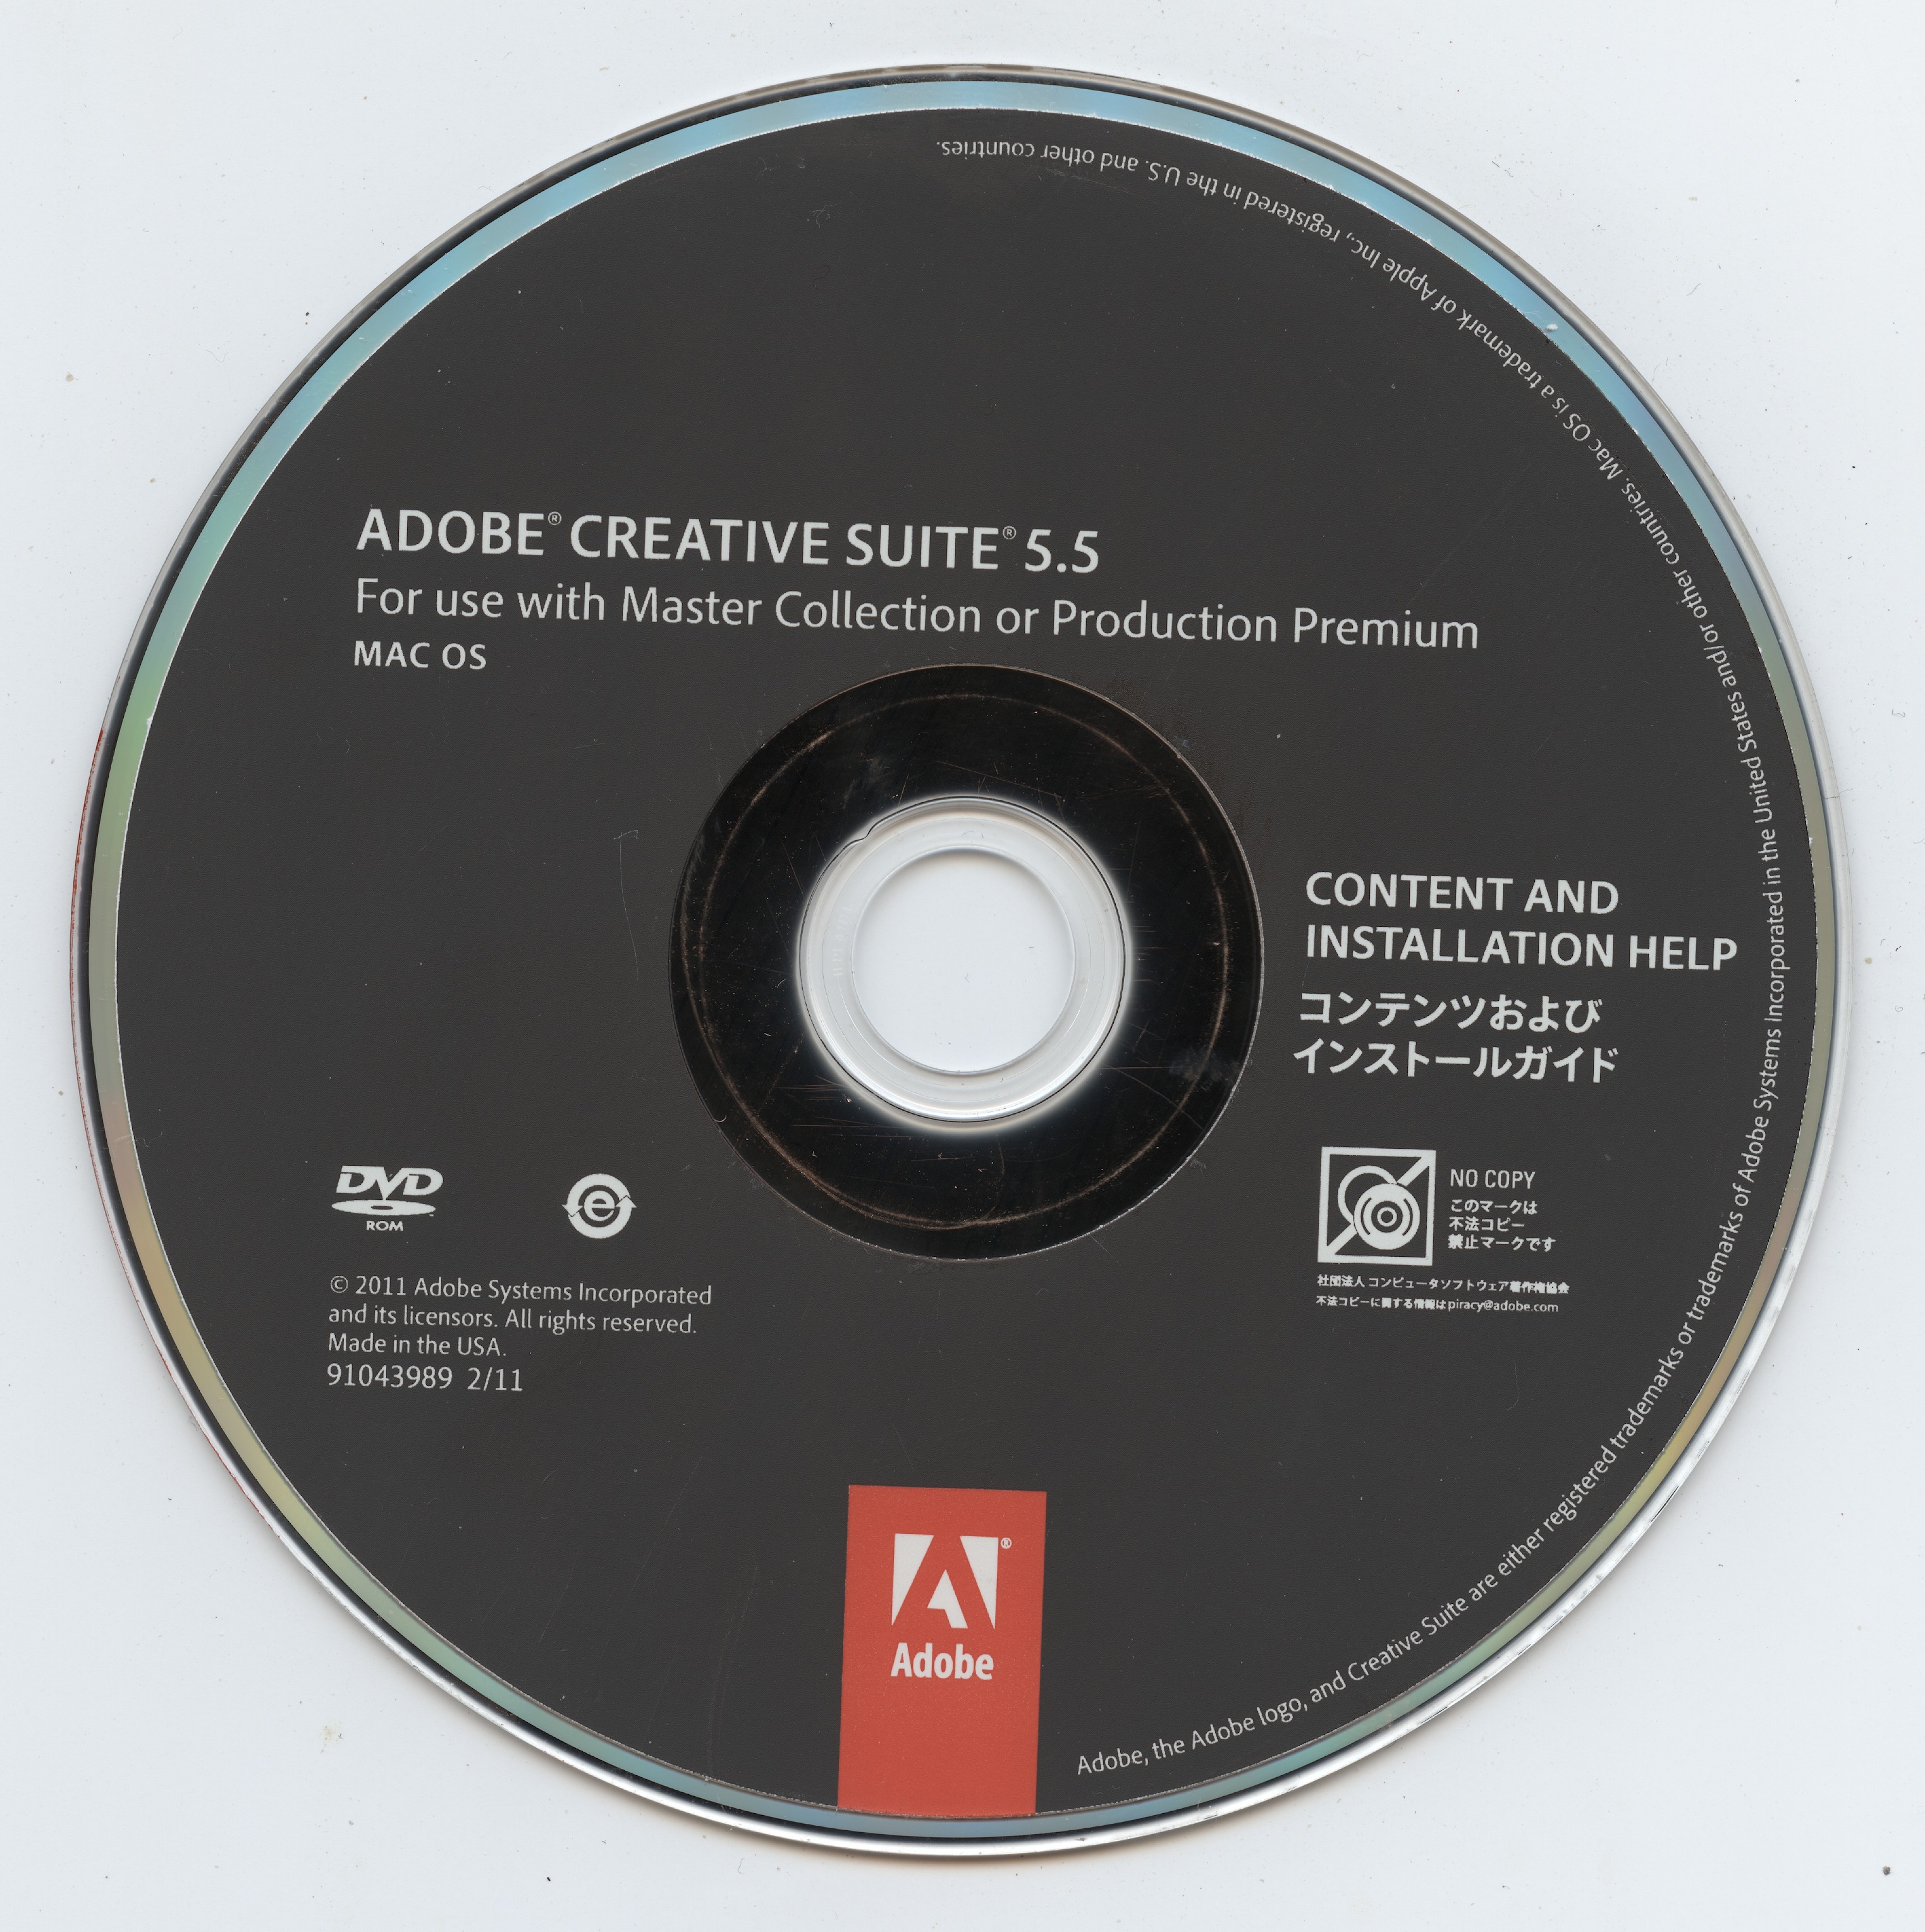 Adobe Creative Suite 5.5 For Use With Master Collection or Production